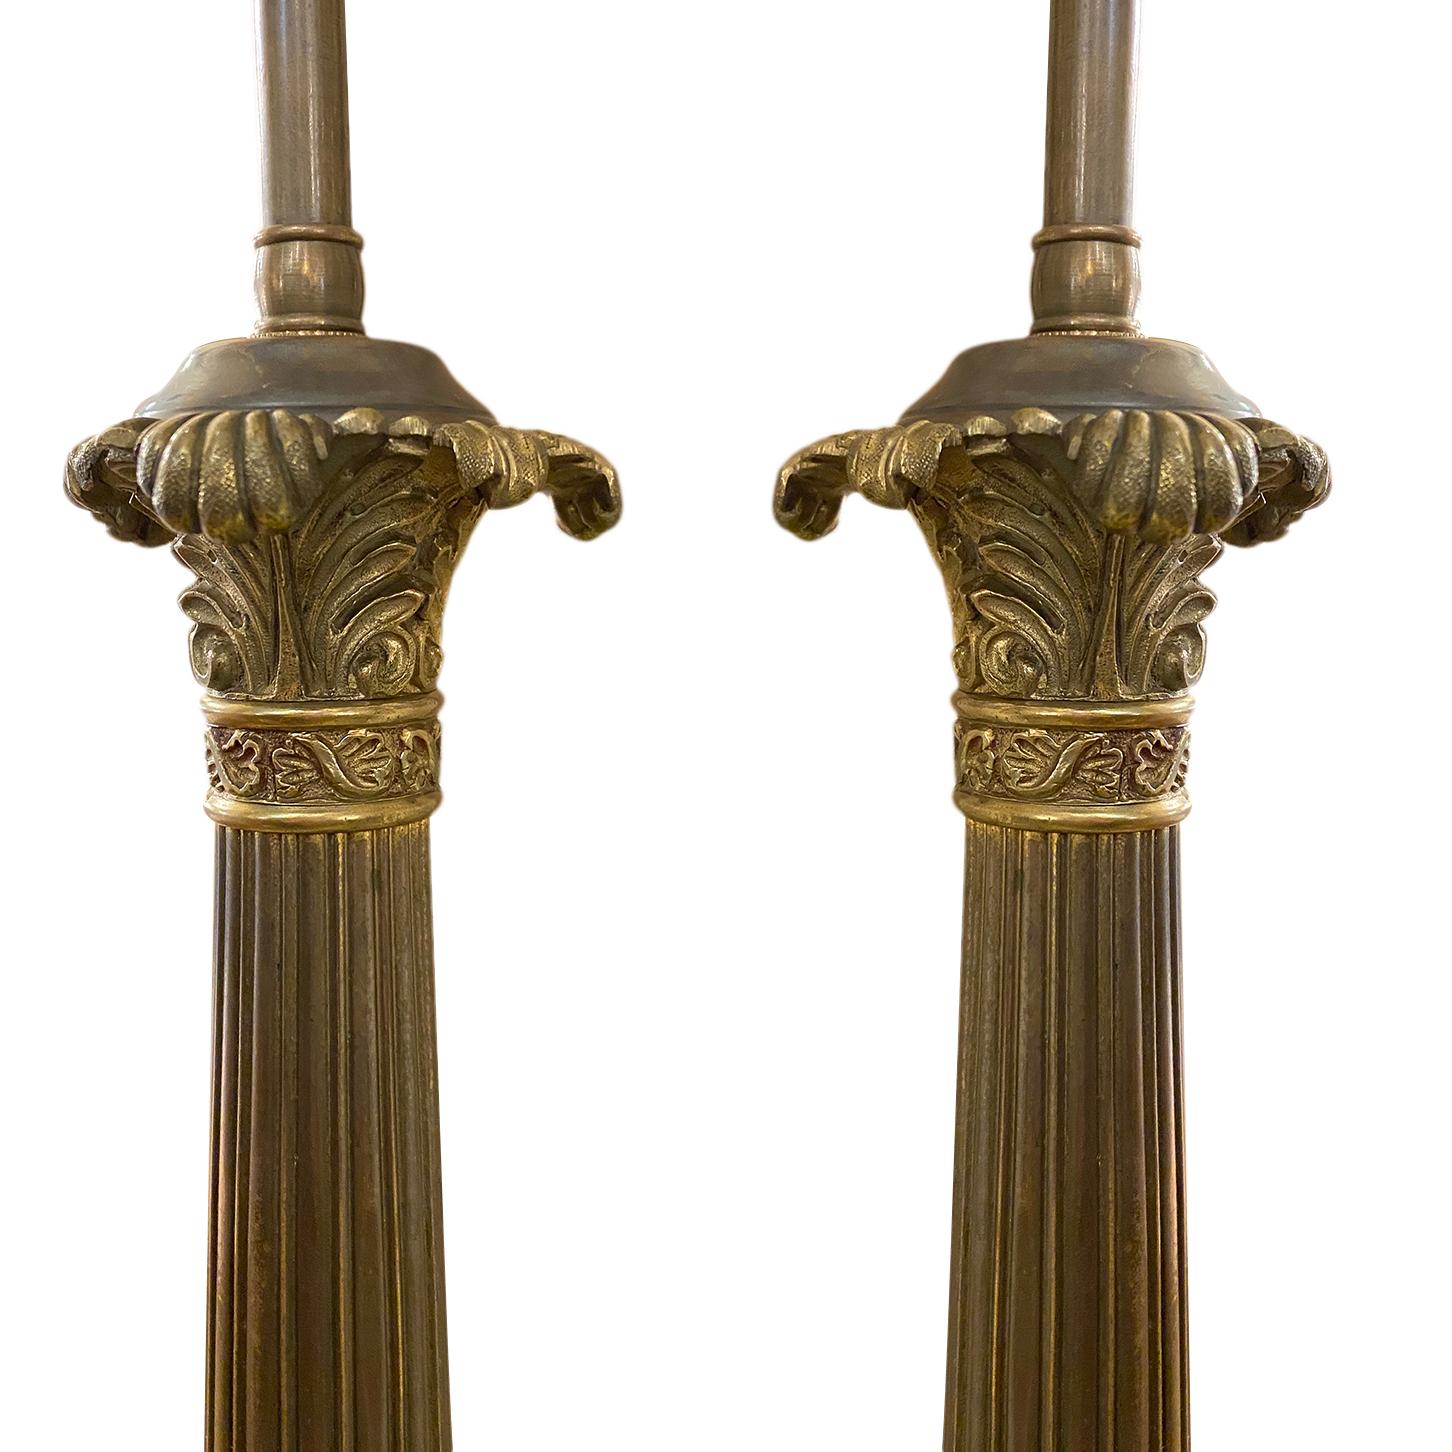 A pair of circa 1900s French Empire style bronze column candlestick table lamps with original patina.

Measurements:
Height of body 18